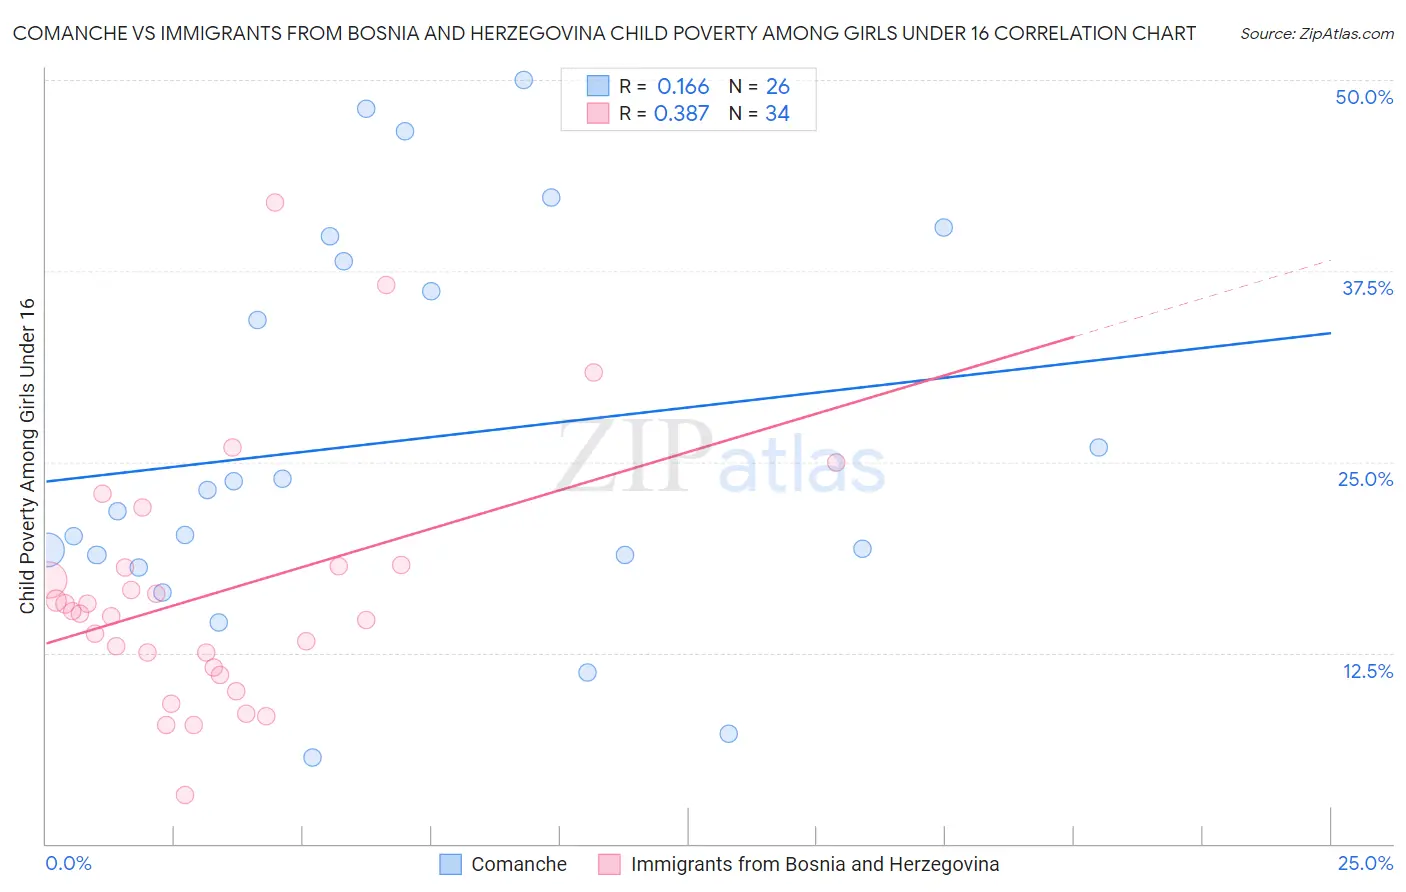 Comanche vs Immigrants from Bosnia and Herzegovina Child Poverty Among Girls Under 16